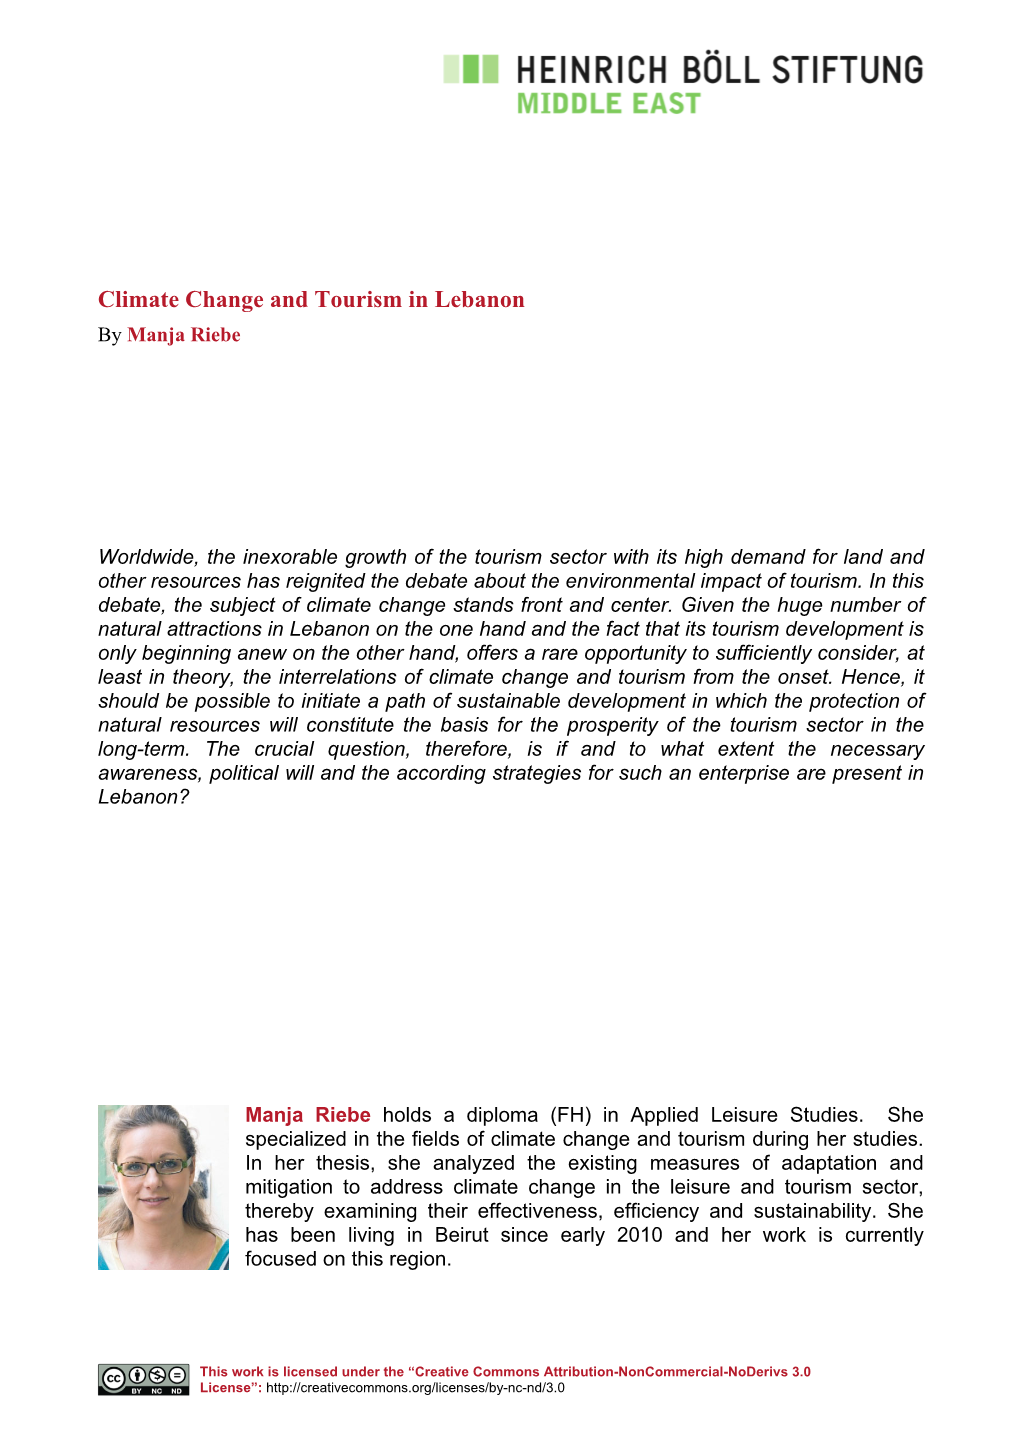 Climate Change and Tourism in Lebanon by Manja Riebe